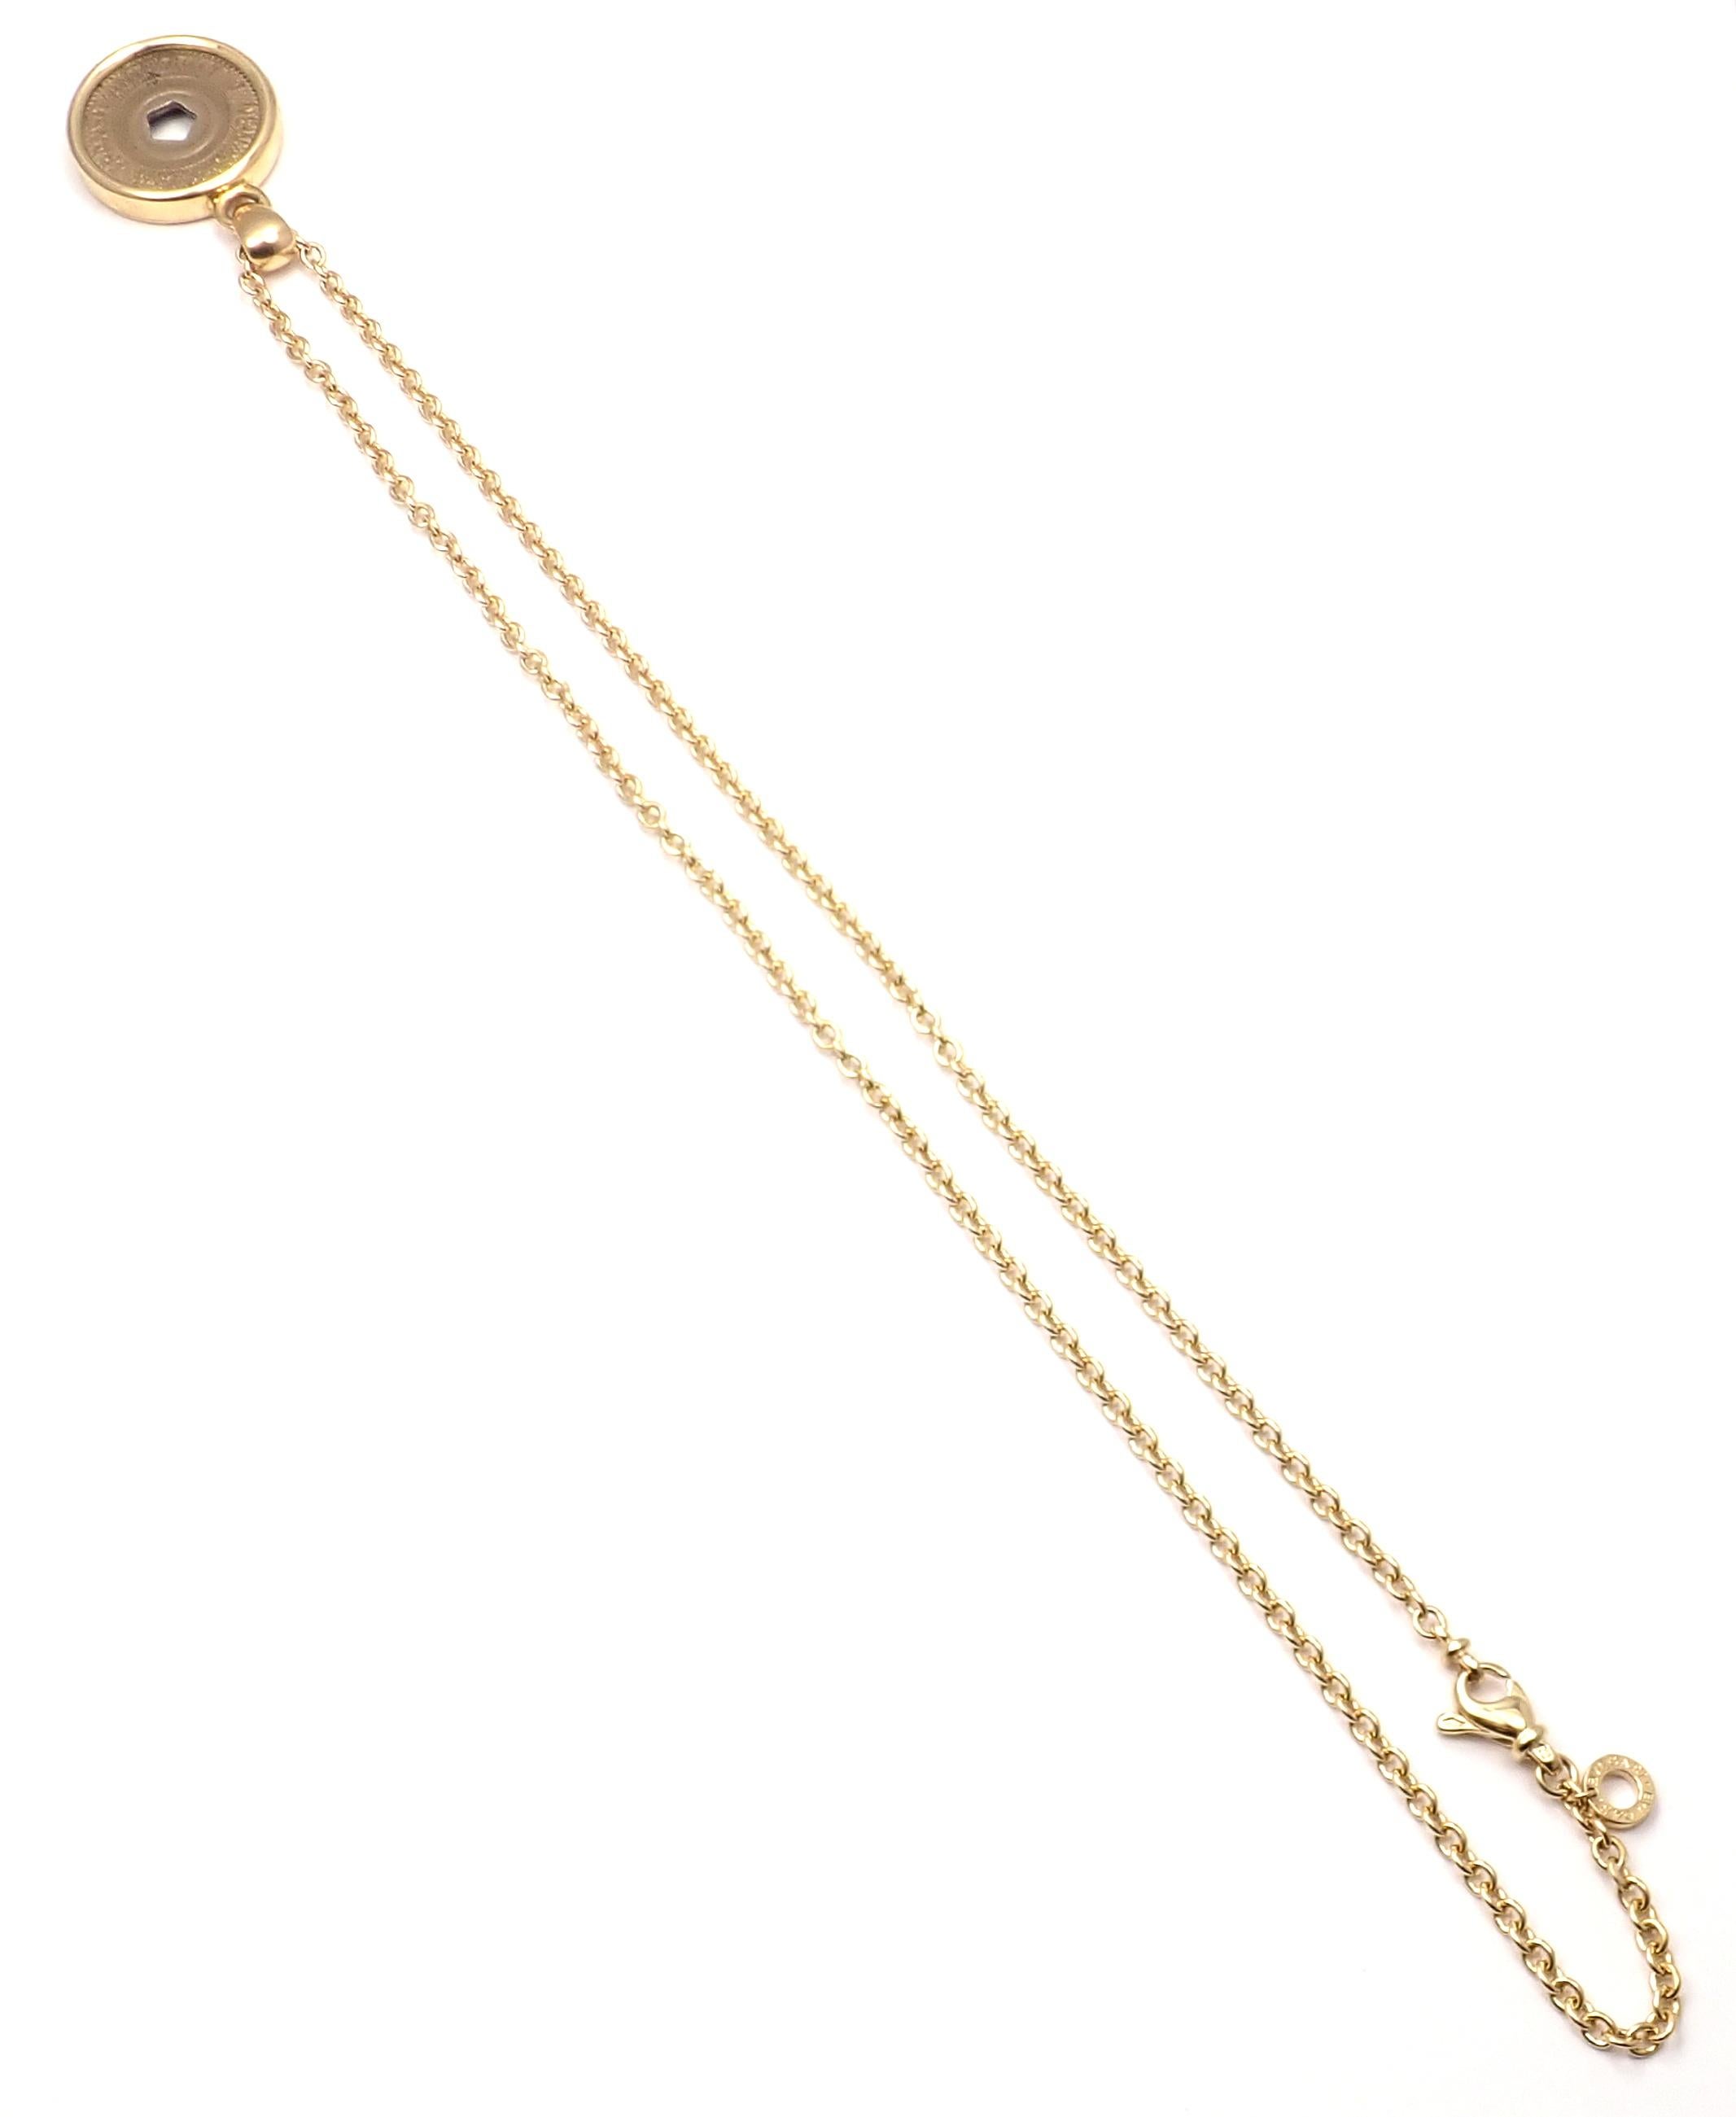 Bulgari NYC Subway Token Limited Edition Yellow Gold Pendant Necklace For Sale 3